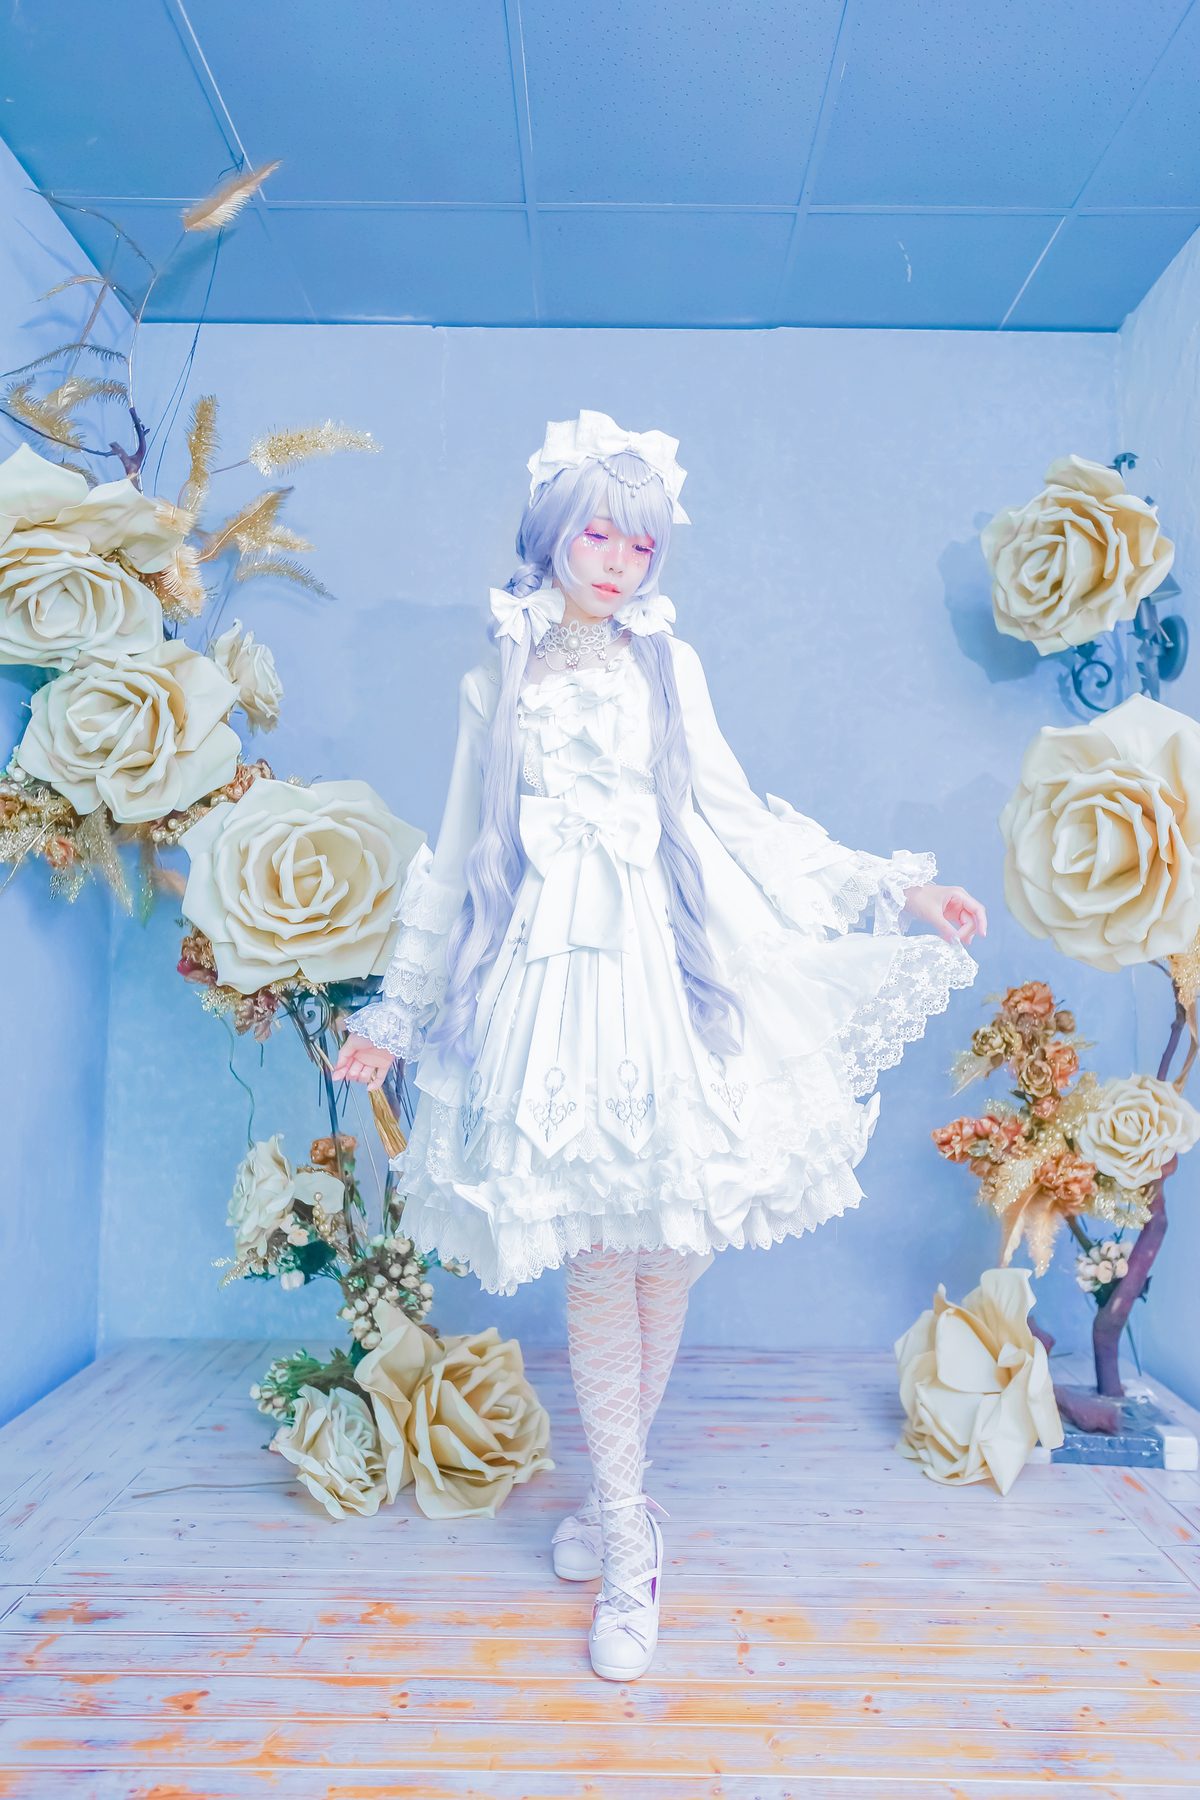 Coser@Ely_eee ElyEE子 TUESDAY TWINTAIL A 0060 3043555798.jpg